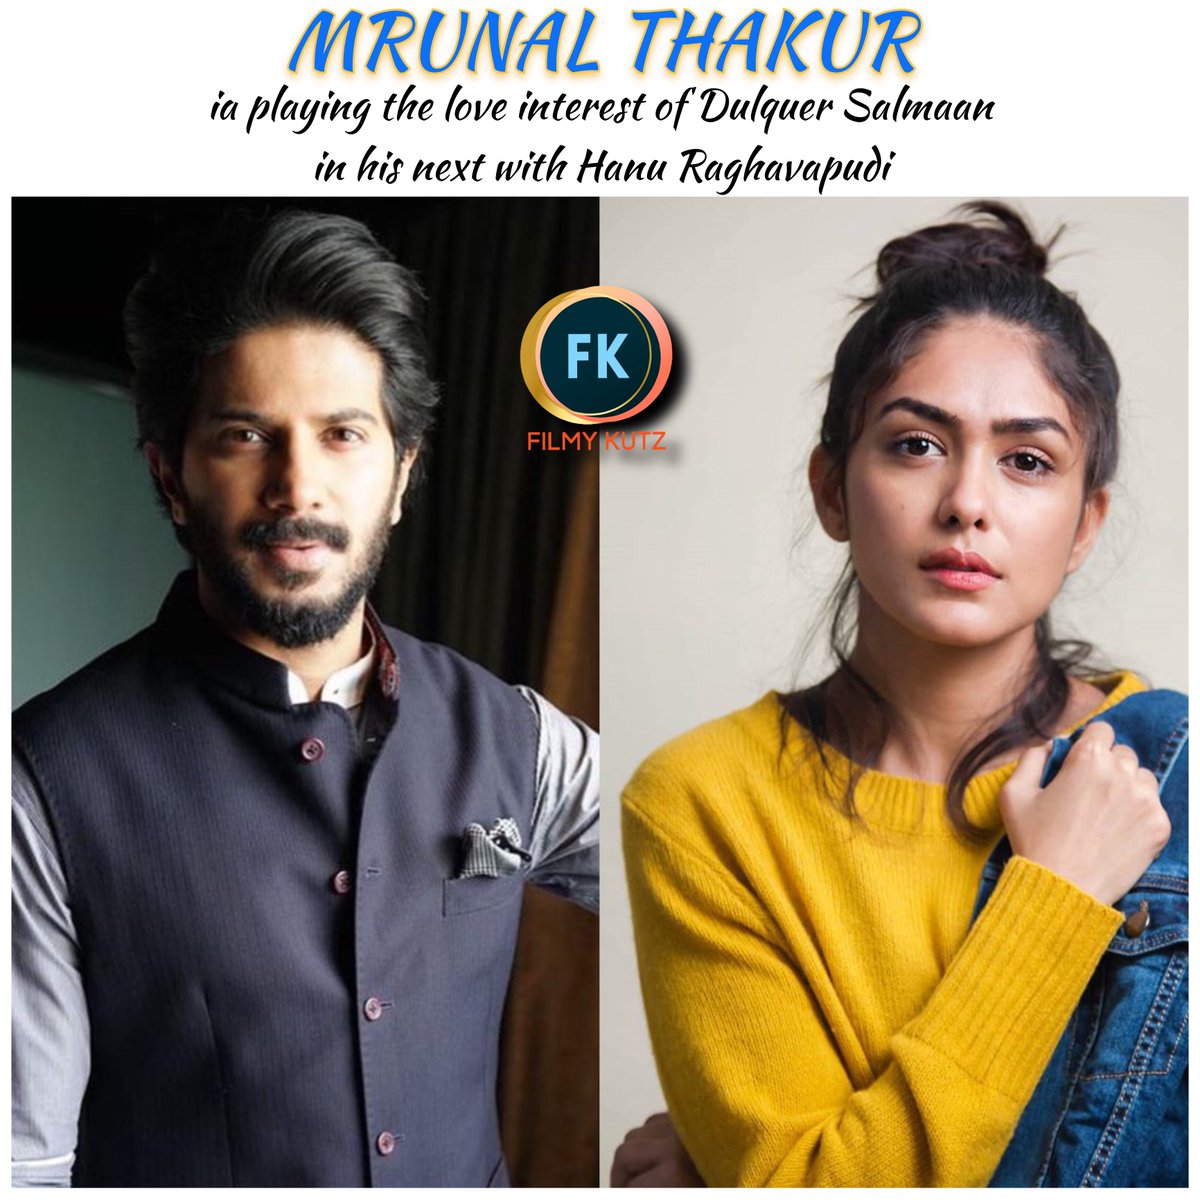 Actress #MrunalThakur is playing the role of SITA in #DulquerSalmaan's upcoming film in which he is playing RAM, a Lieutenant. 

A film by #HanuRaghavapudi 
Music by #VishalChandrasekhar